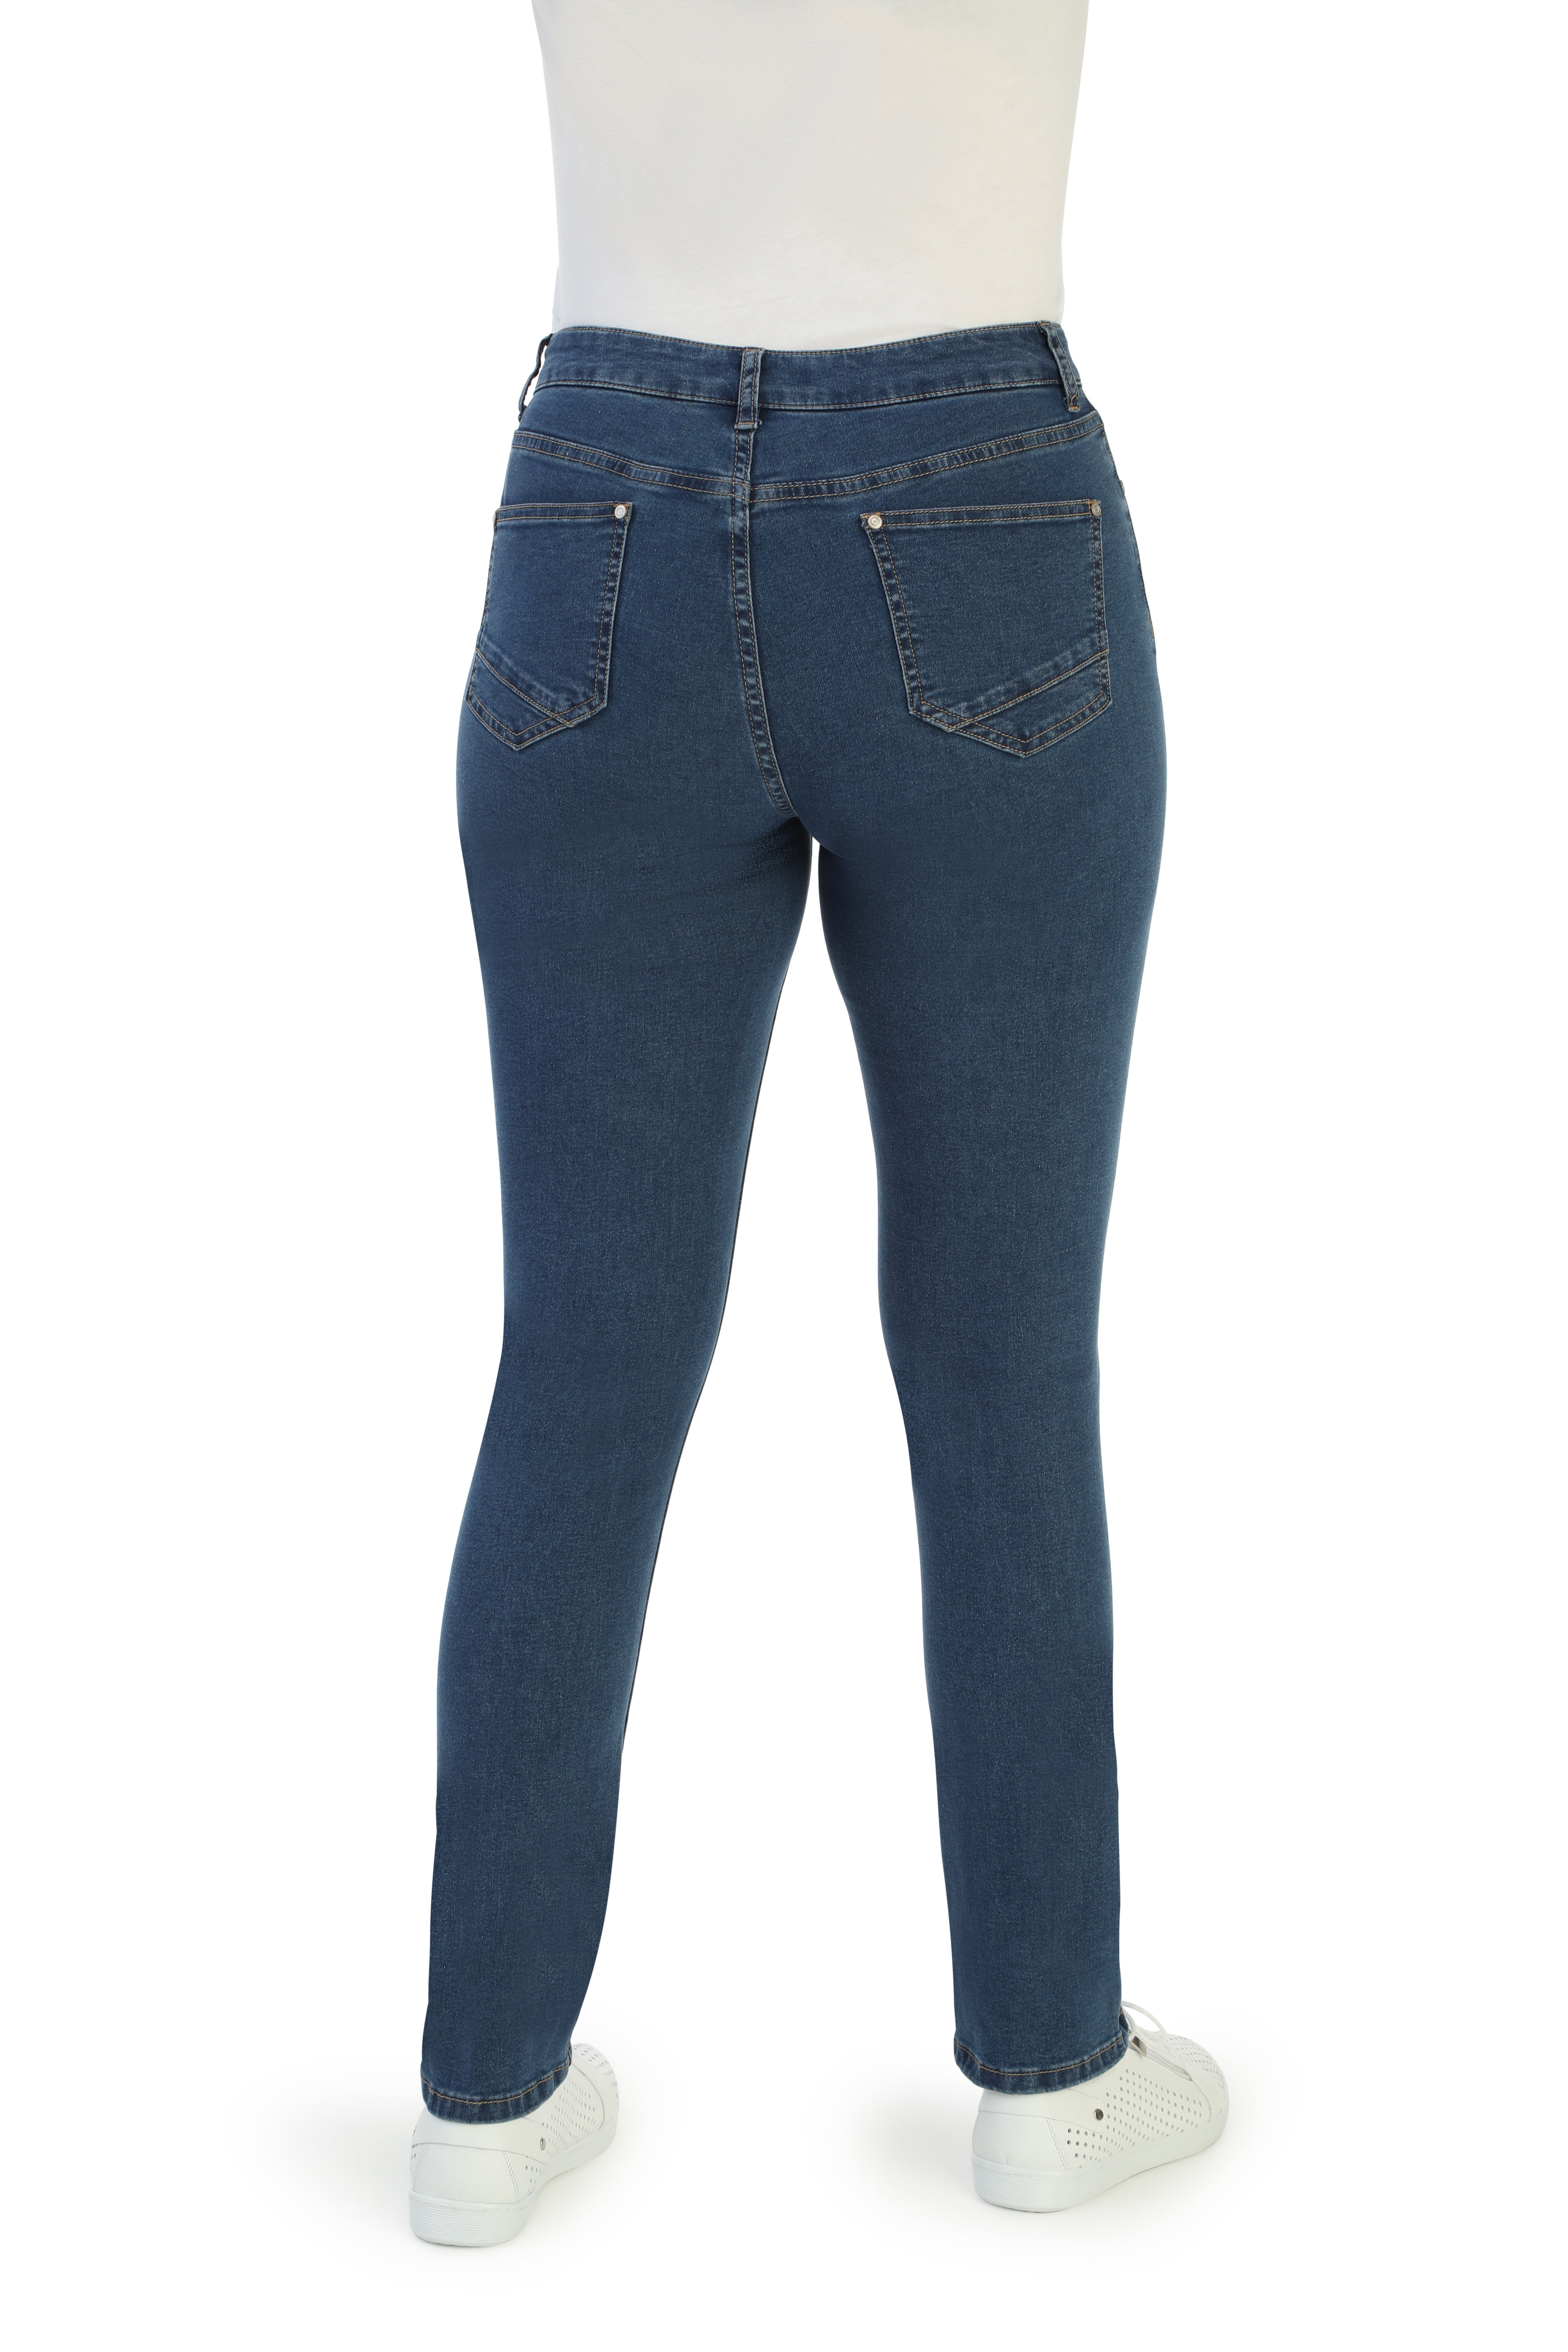 Dark Blue High Waisted CrossOver Jeans – Paper Dolls Fashion Boutique